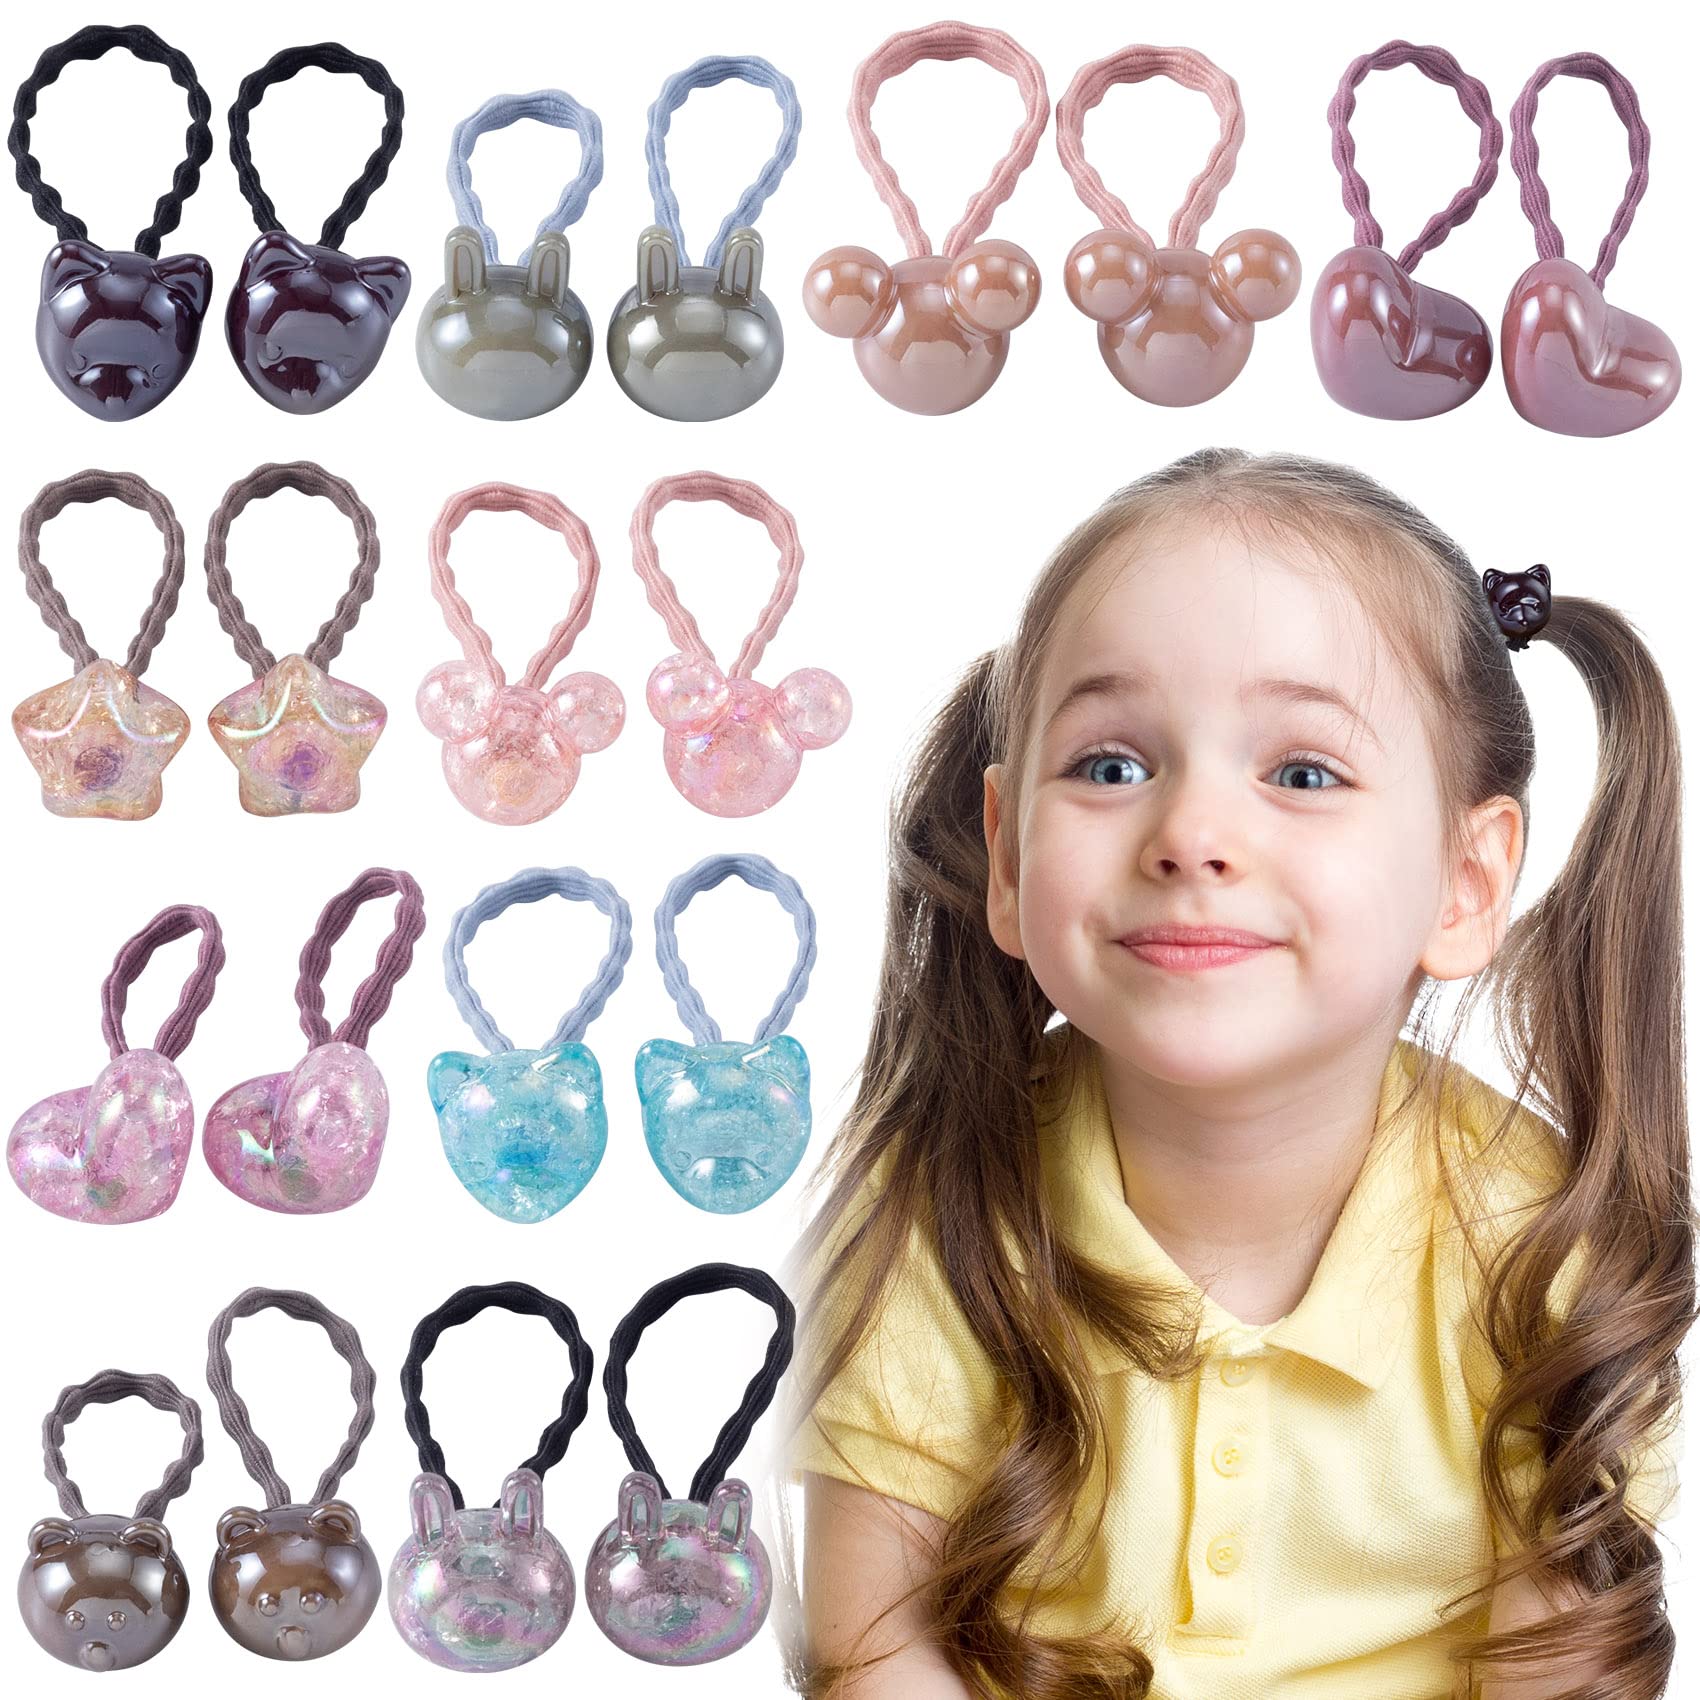 30pcs Elastic Hair Ties PAGOW Toddlers' Colorful Ponytail Holder